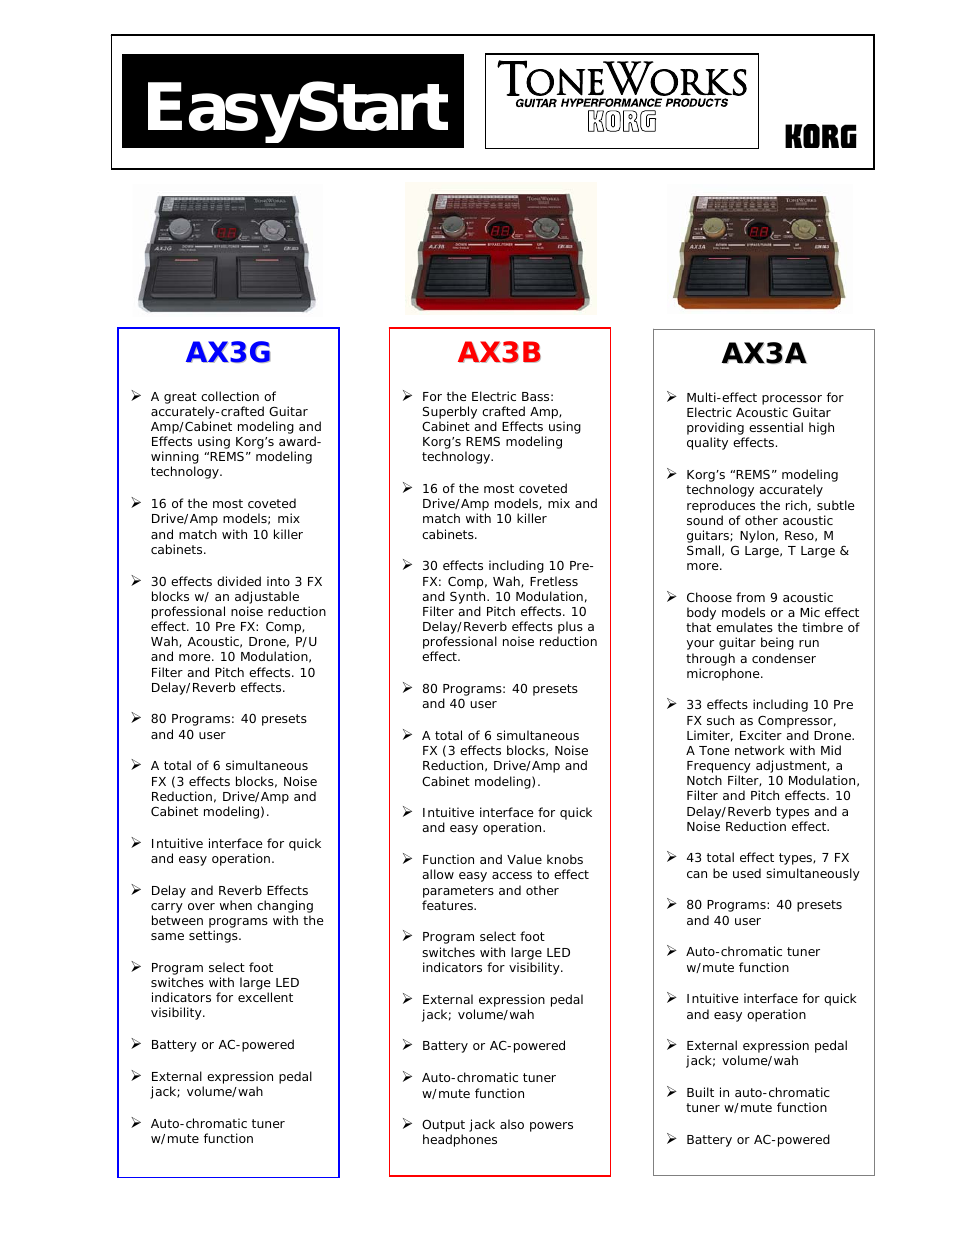 EASYSTART AX3A (Page 1)